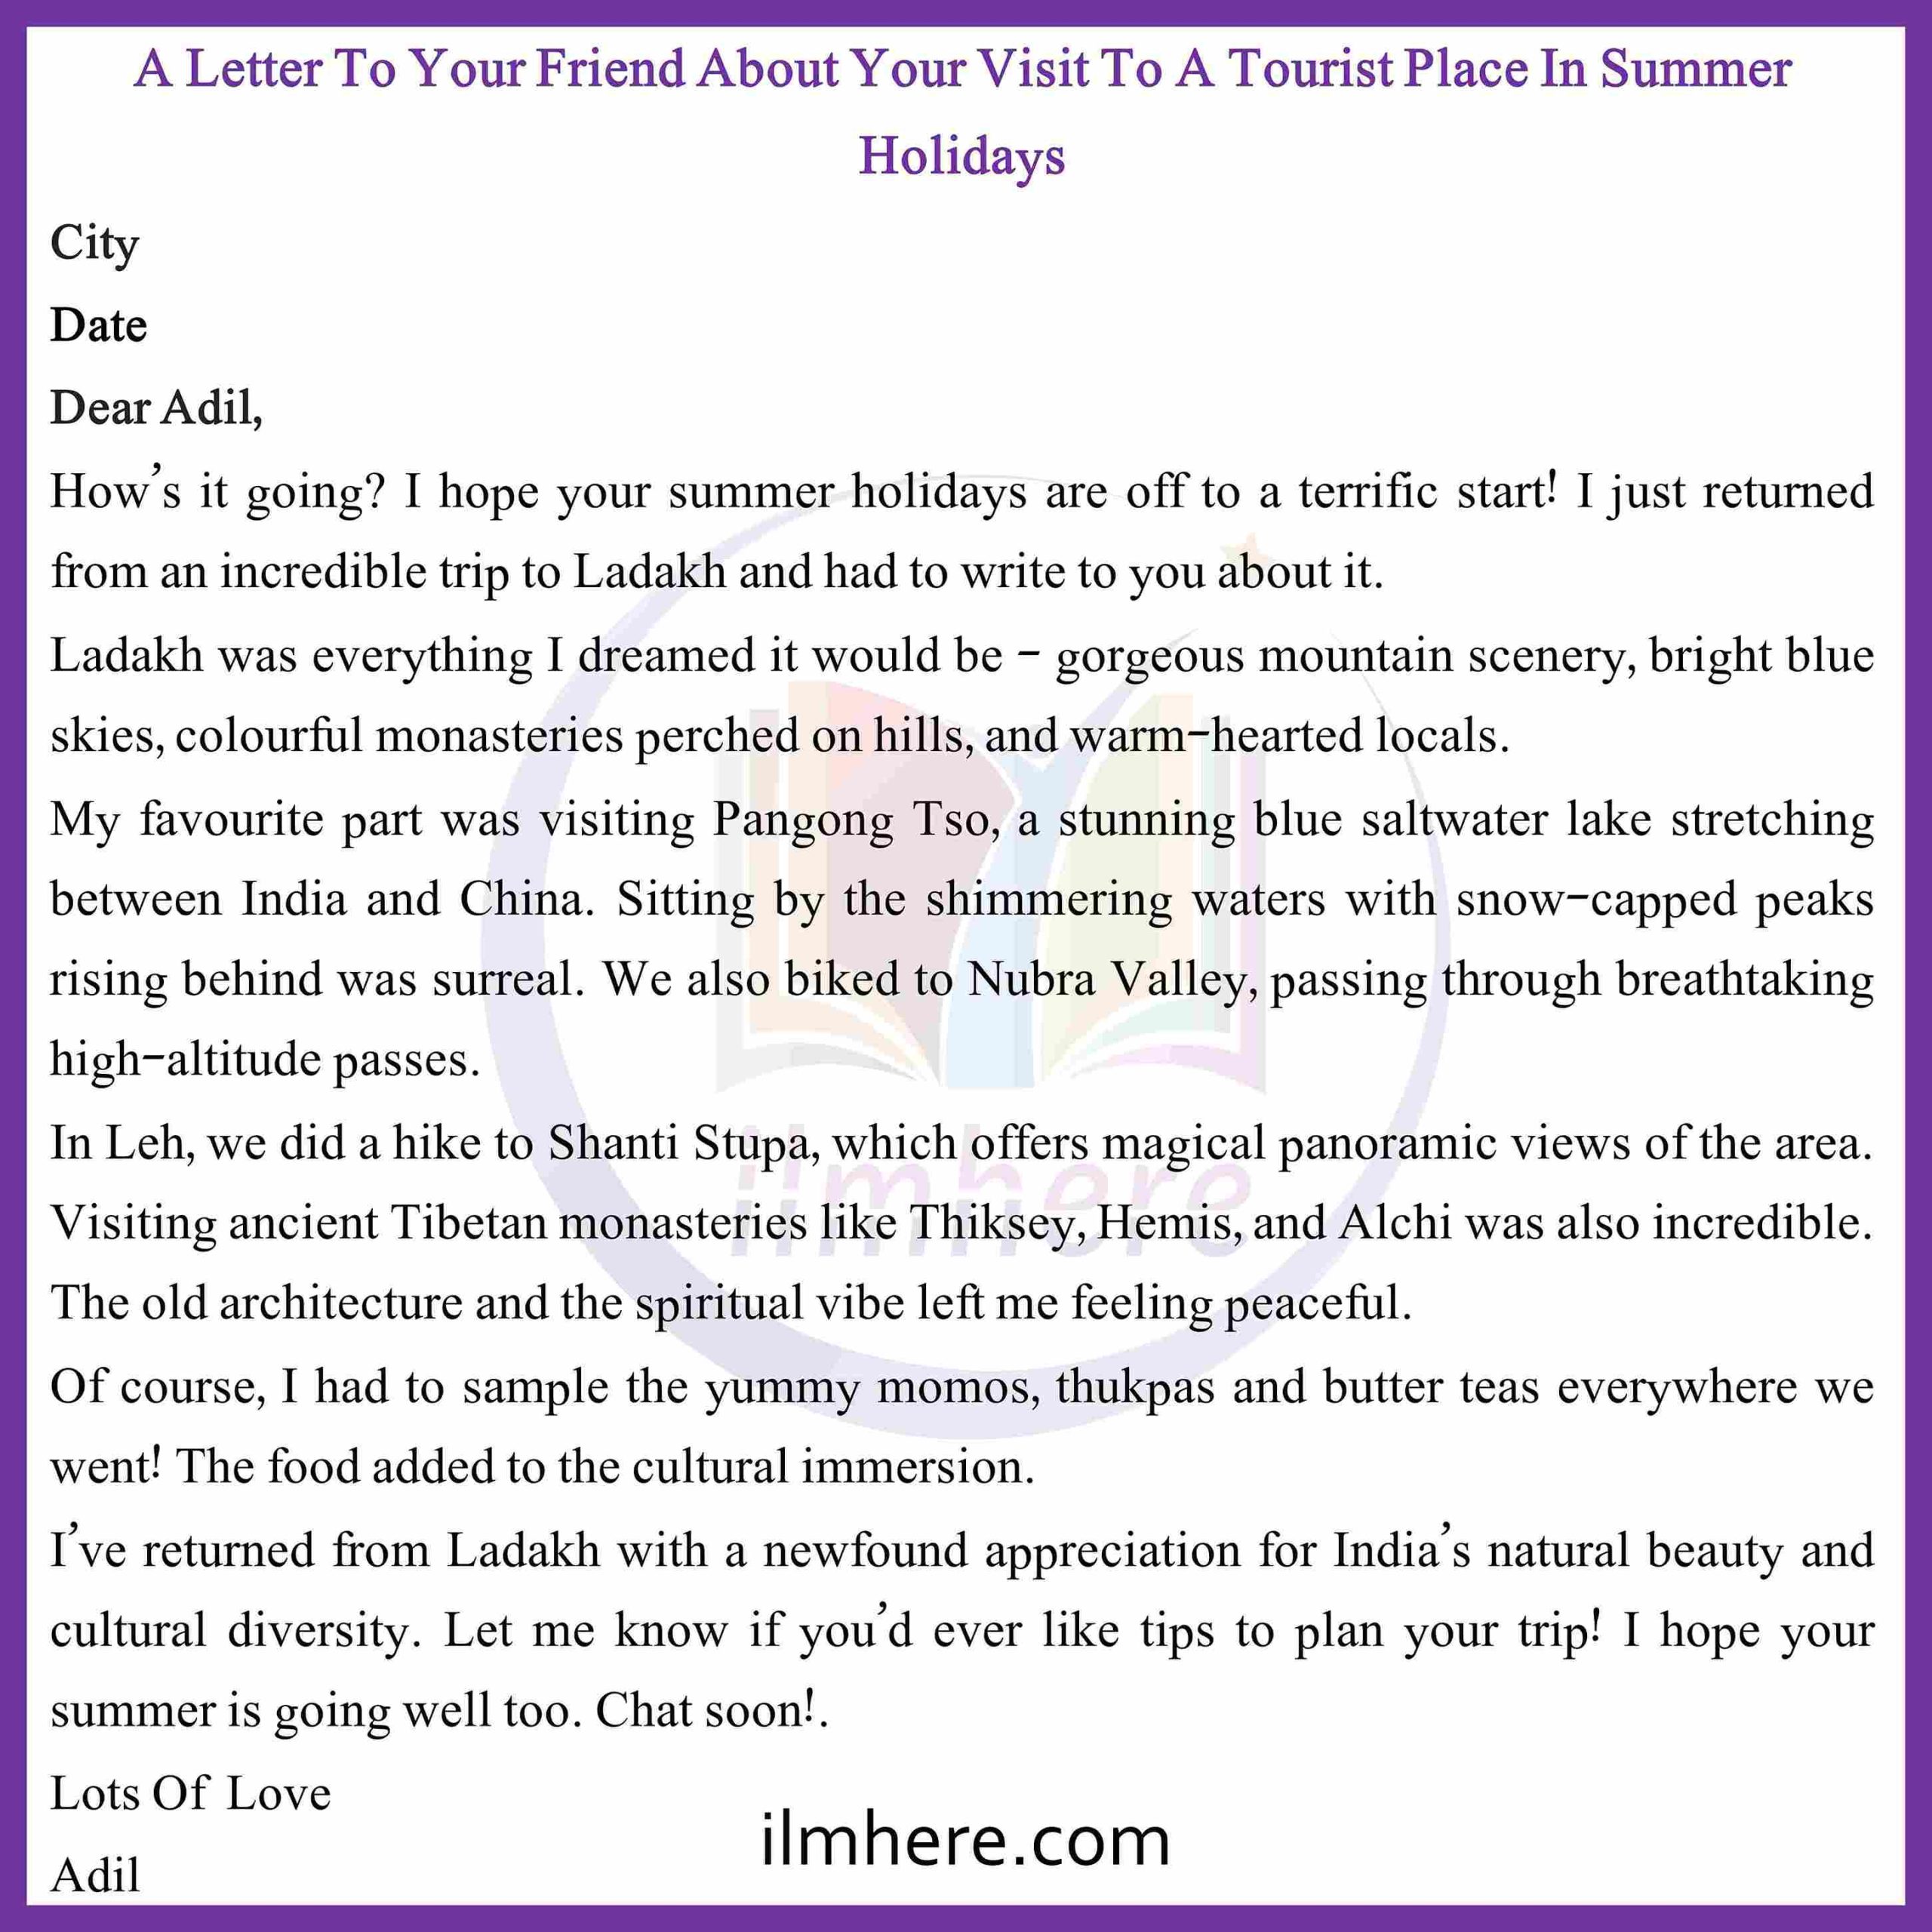 How to Write A Letter To Your Friend About Your Visit To A Tourist Place In Summer Holidays